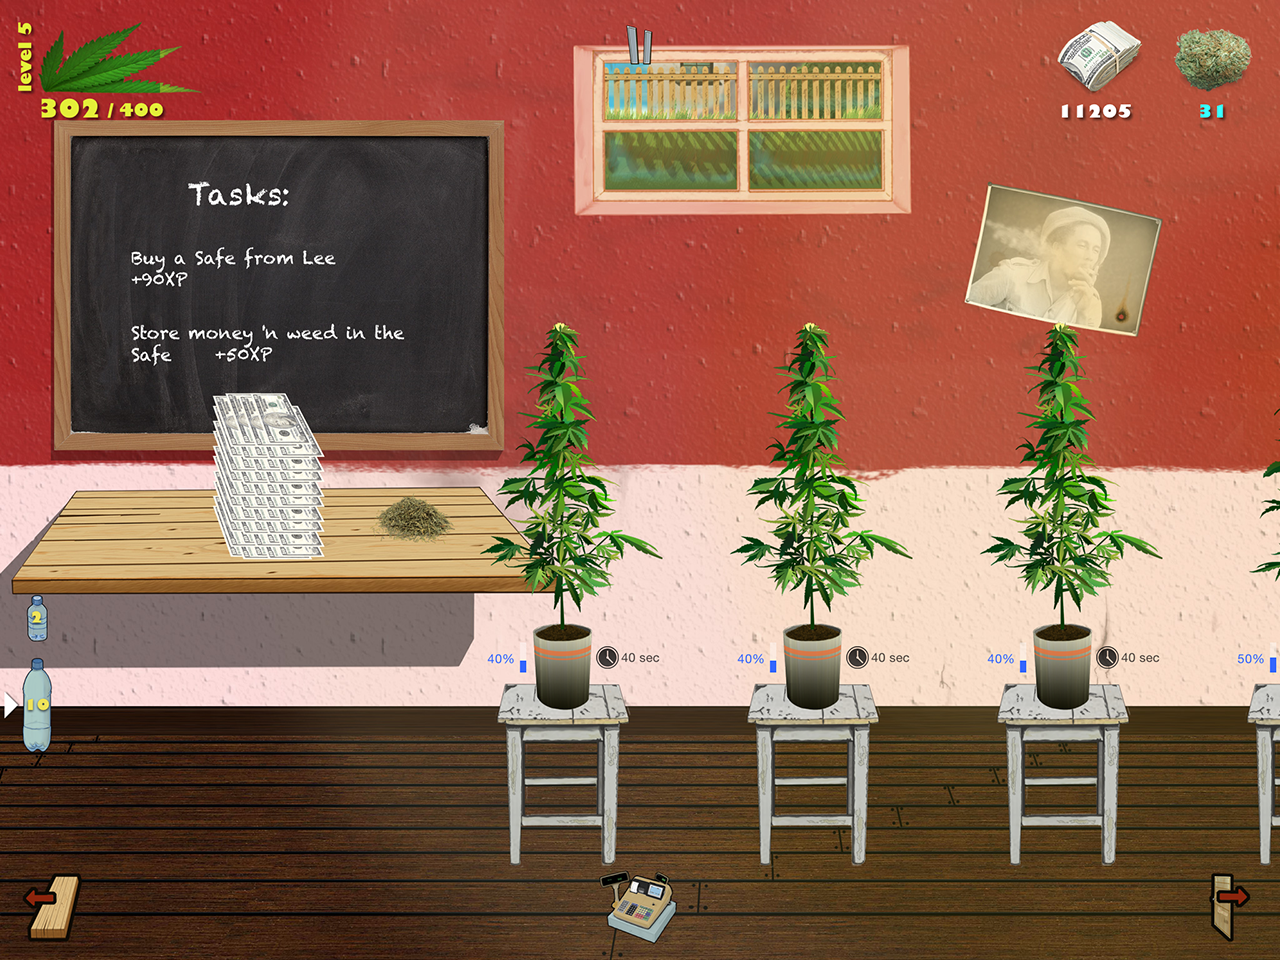 apple approved drug dealing game weed firm tops itunes charts image 1